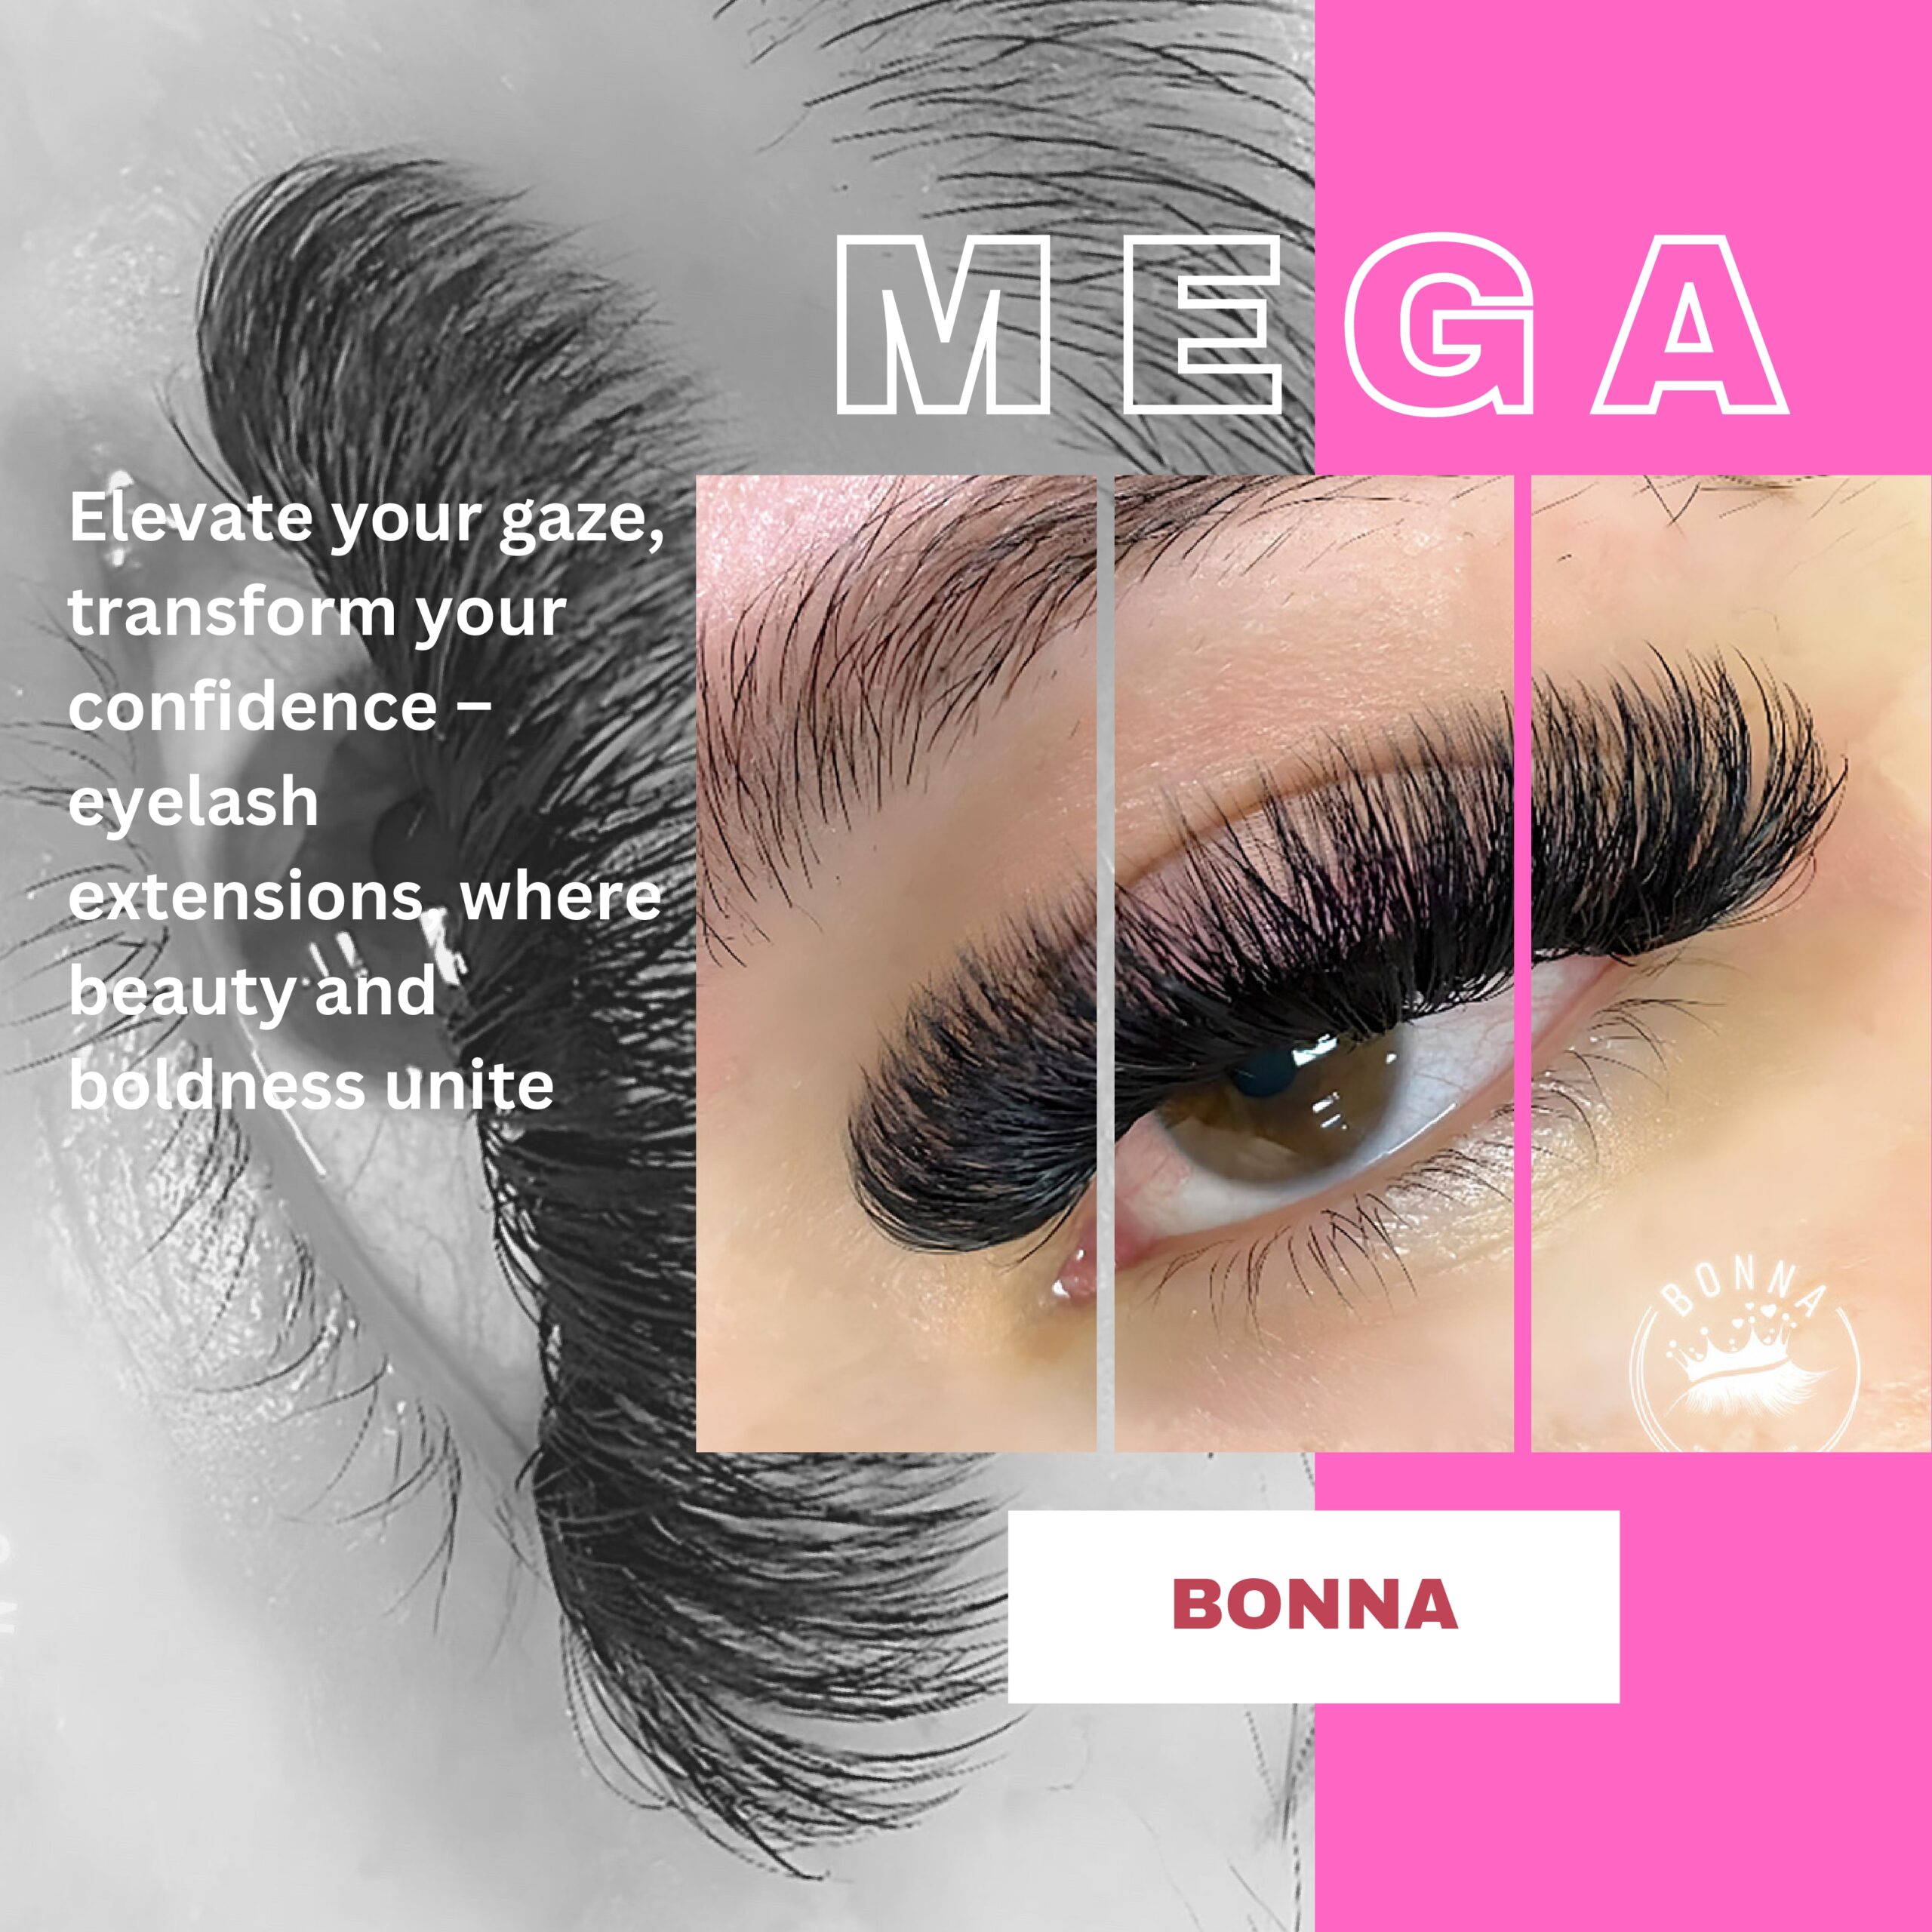 Mega Volume Eyelashes let's take a closer look at the pros, cons, and all your questions answered by Bonna Beauty's experts